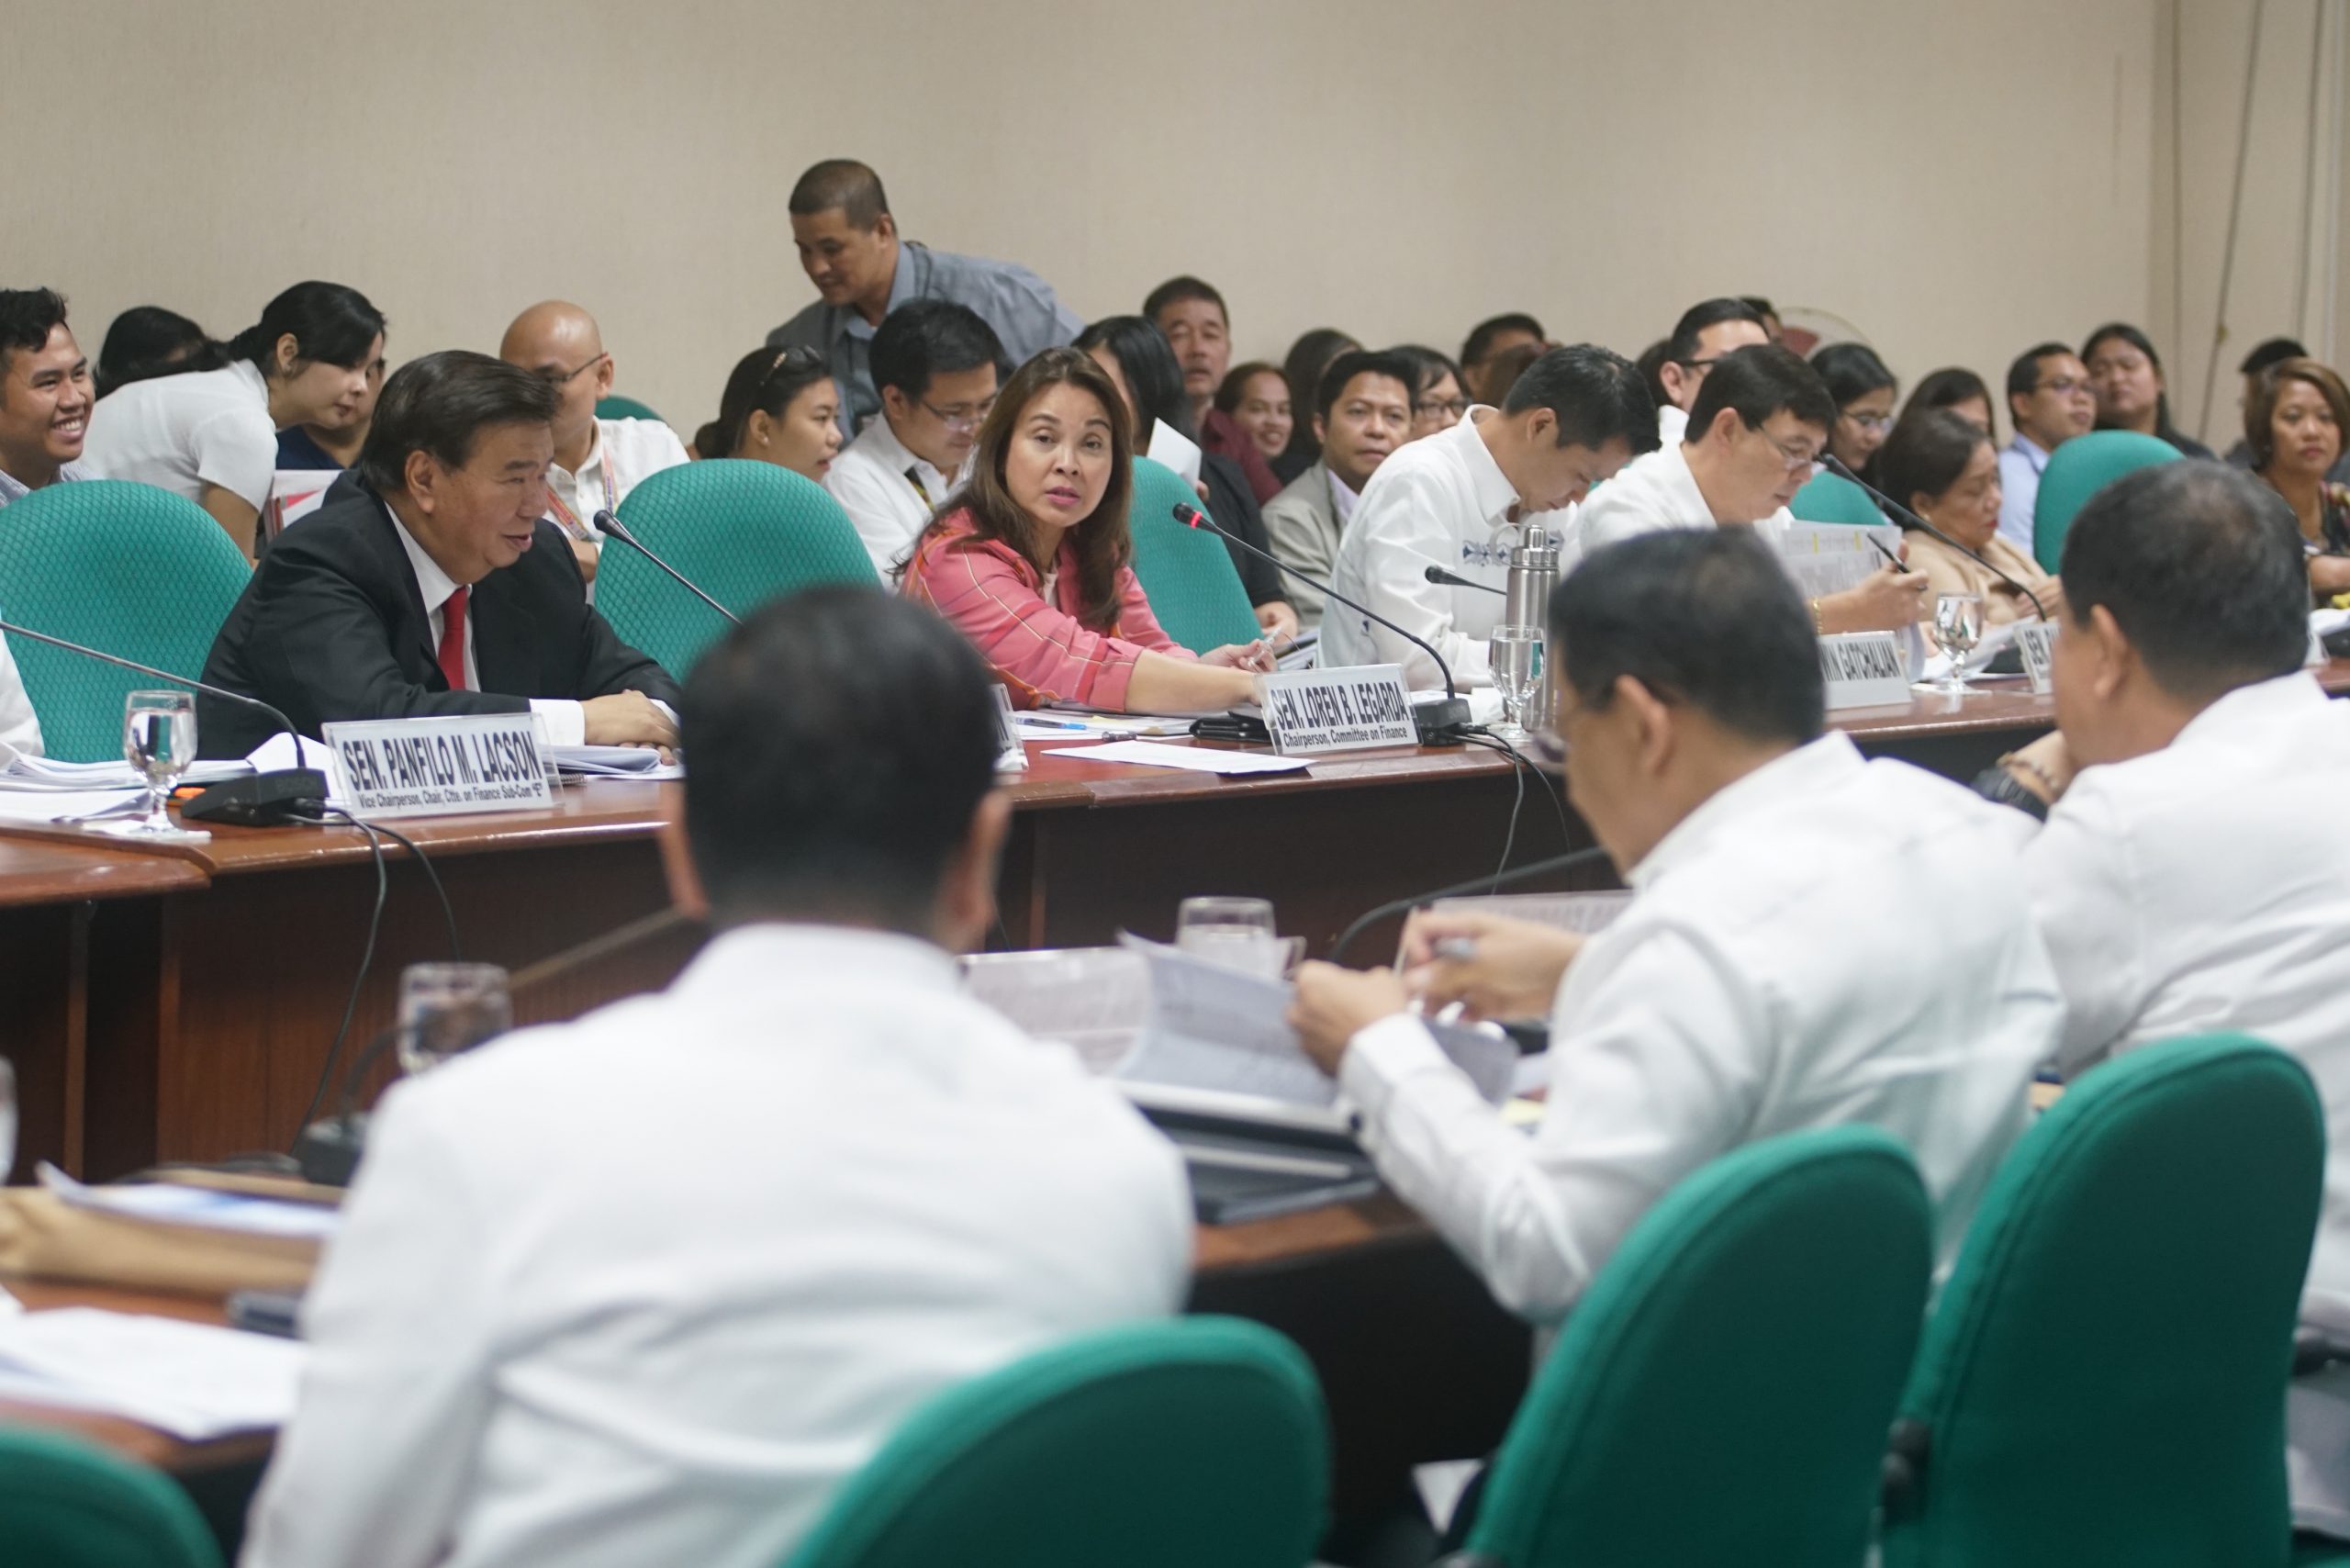 Briefing by the Development Budget Coordination Committee (DBCC) on the 2018 National Expenditure Program (NEP)